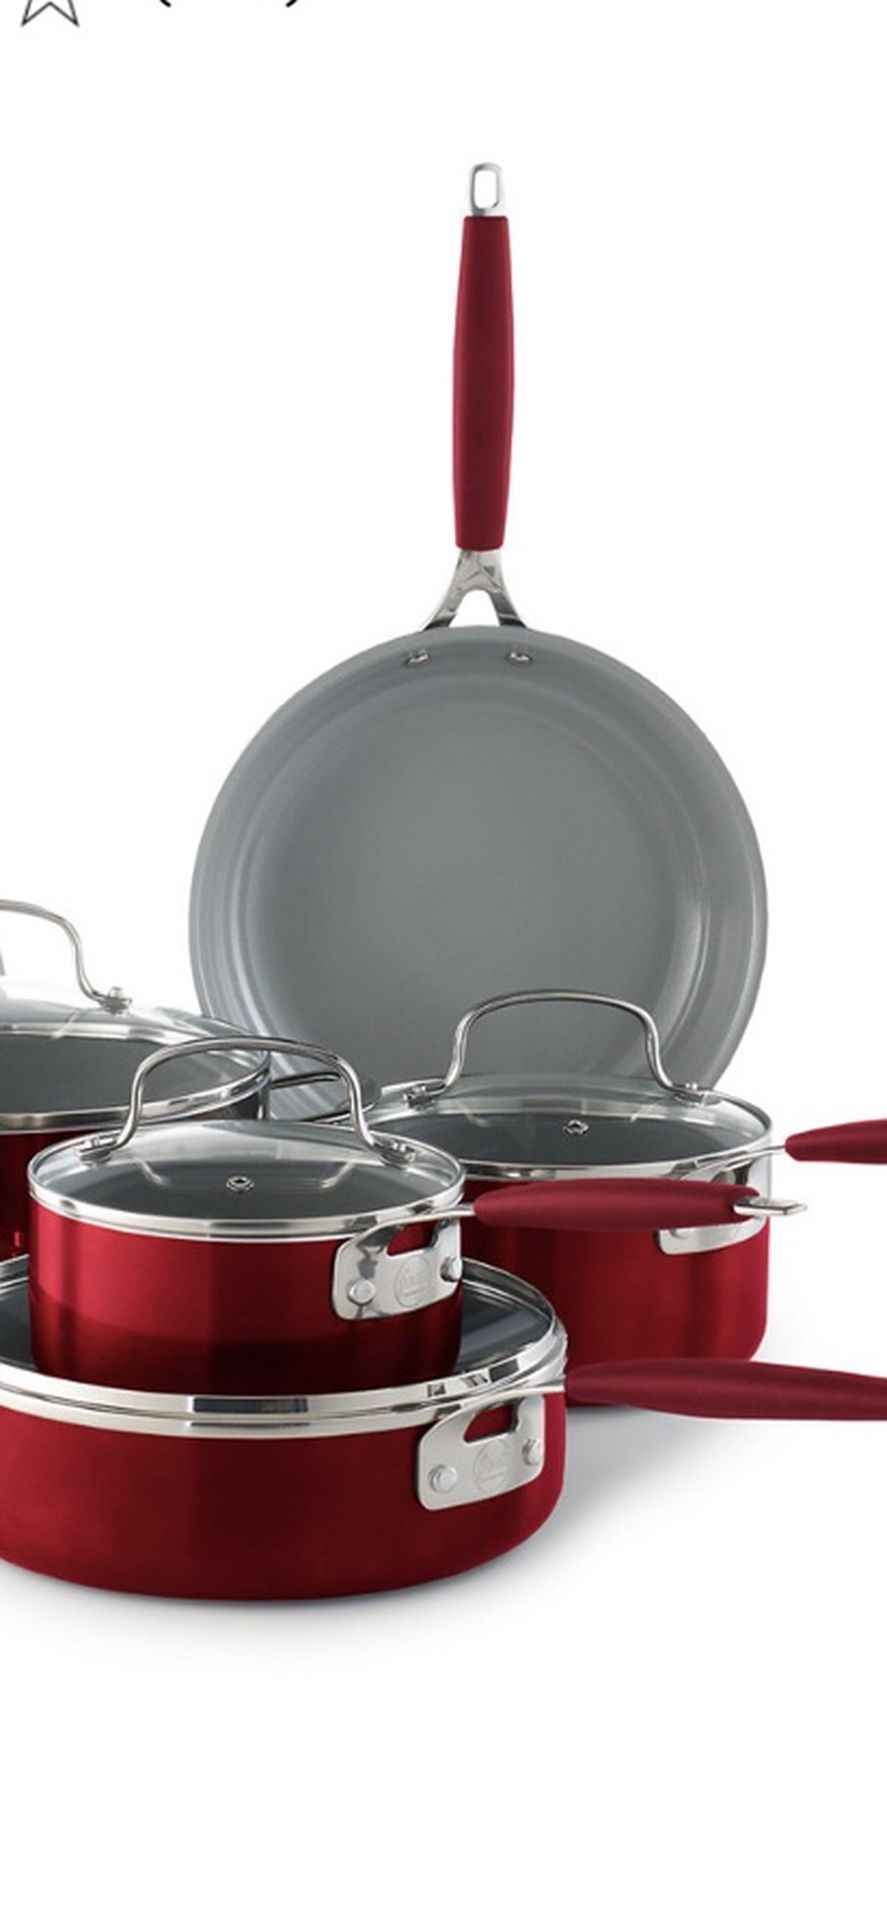 Cookware both Sets For $140.00